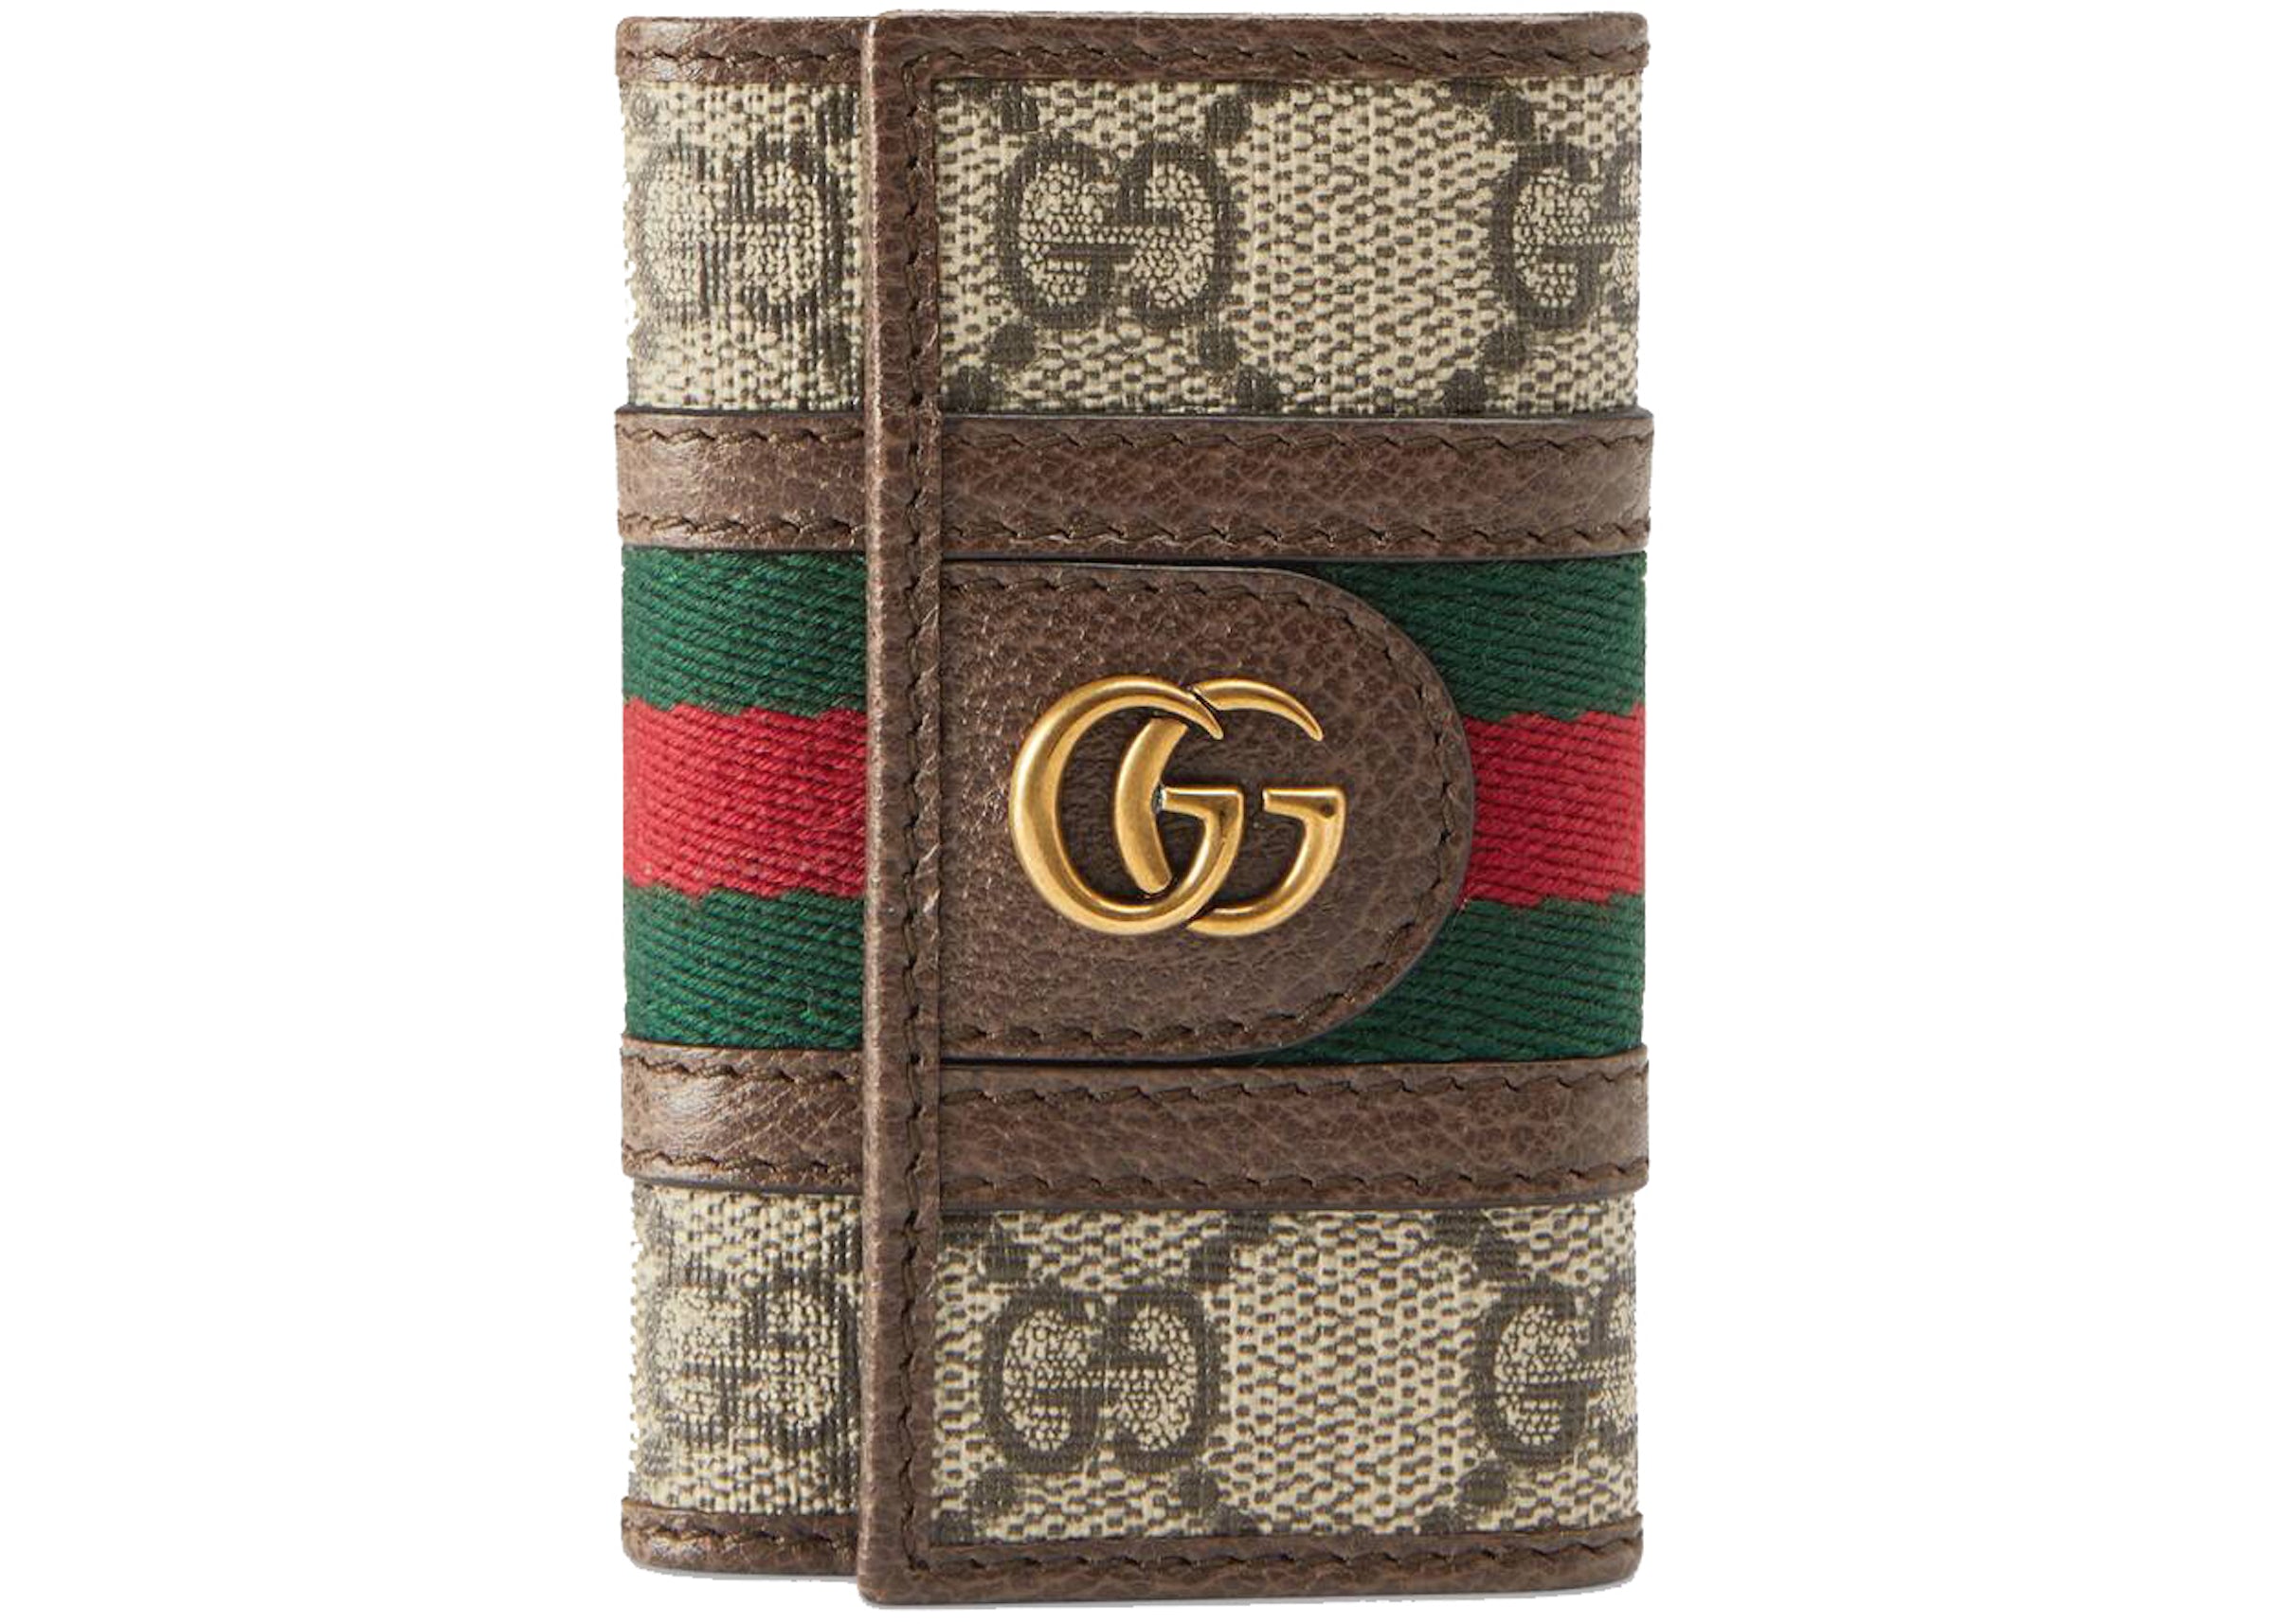 Gucci, Accessories, Gucci Ophidia Key Pouch